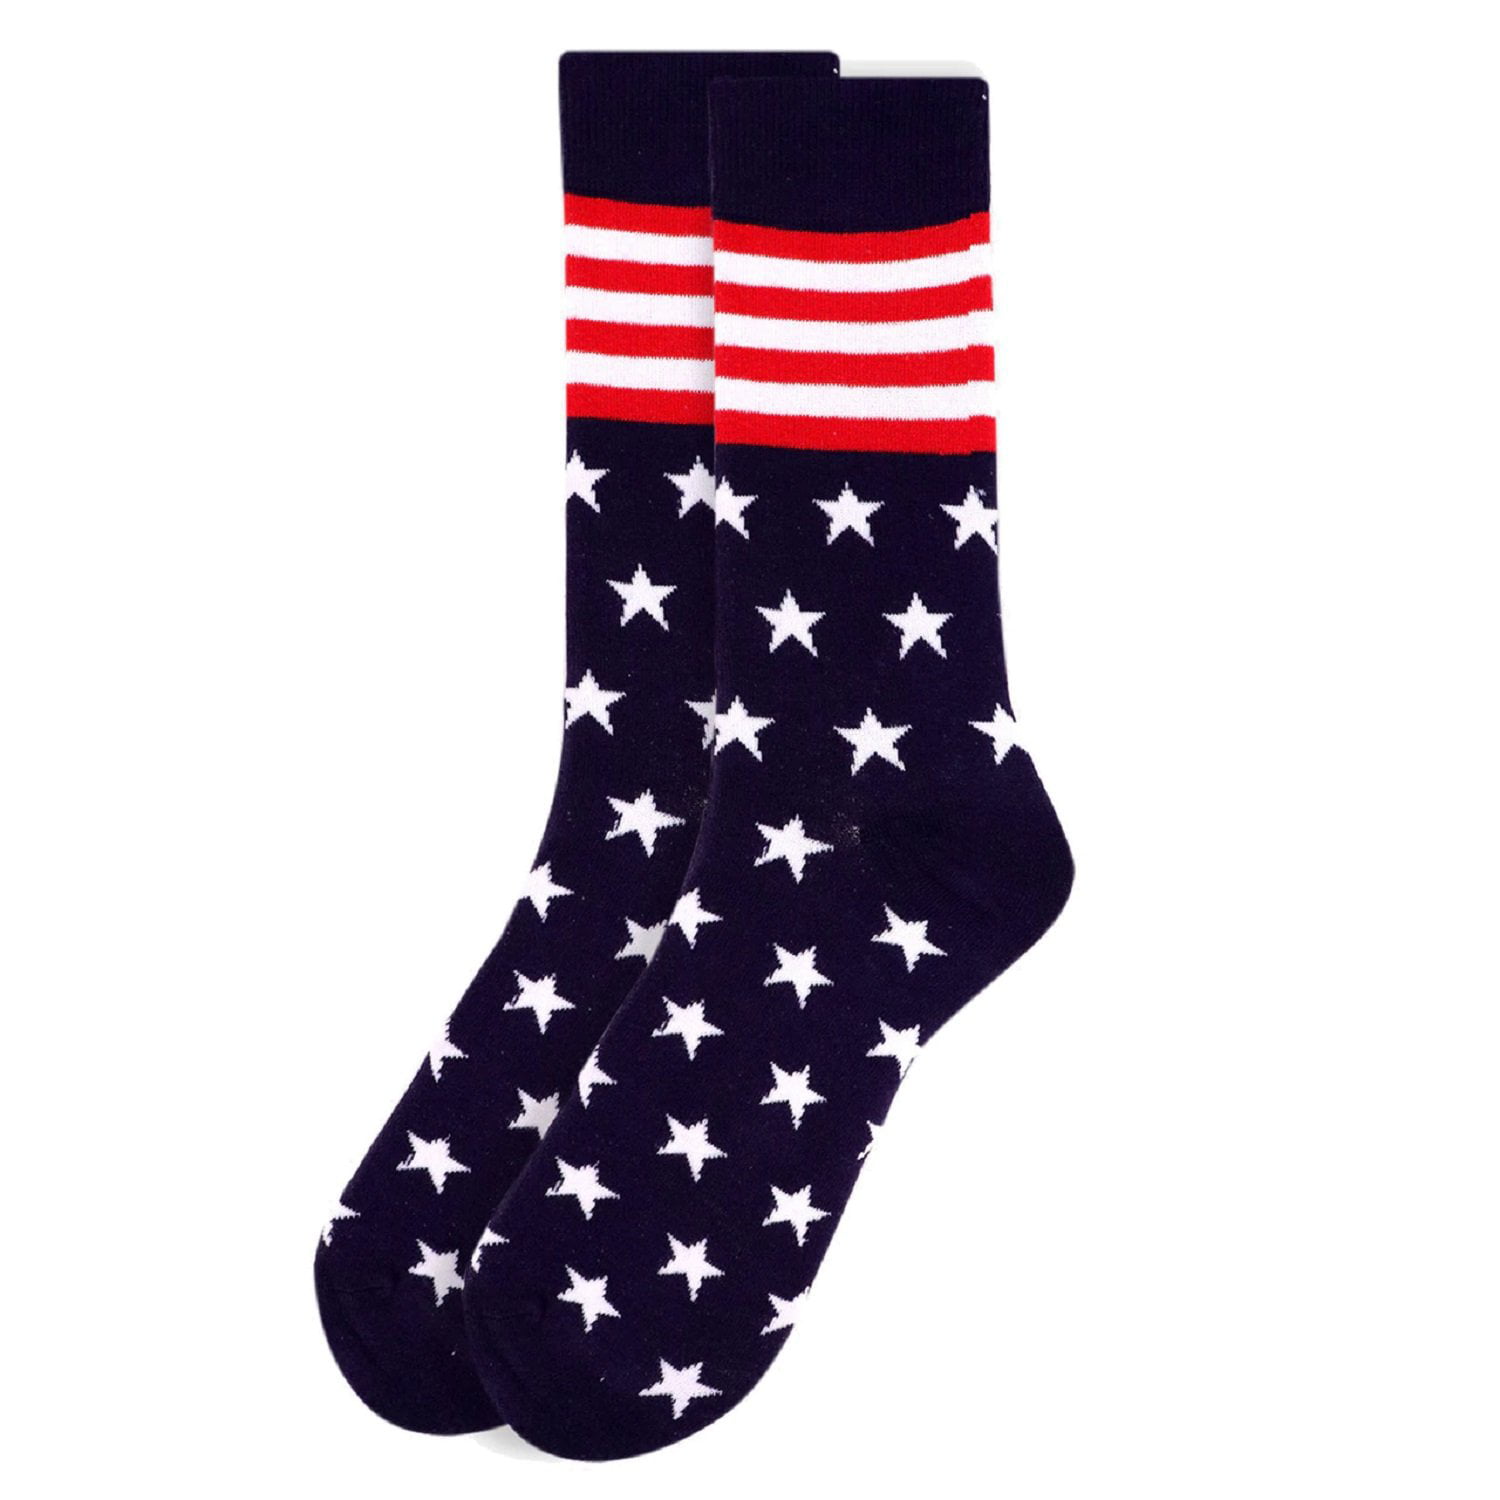 US Patriotic Socks with heart printing in flag colors Comfortable Socks with cushioned bottom Good luck socks with crisp bold colors print